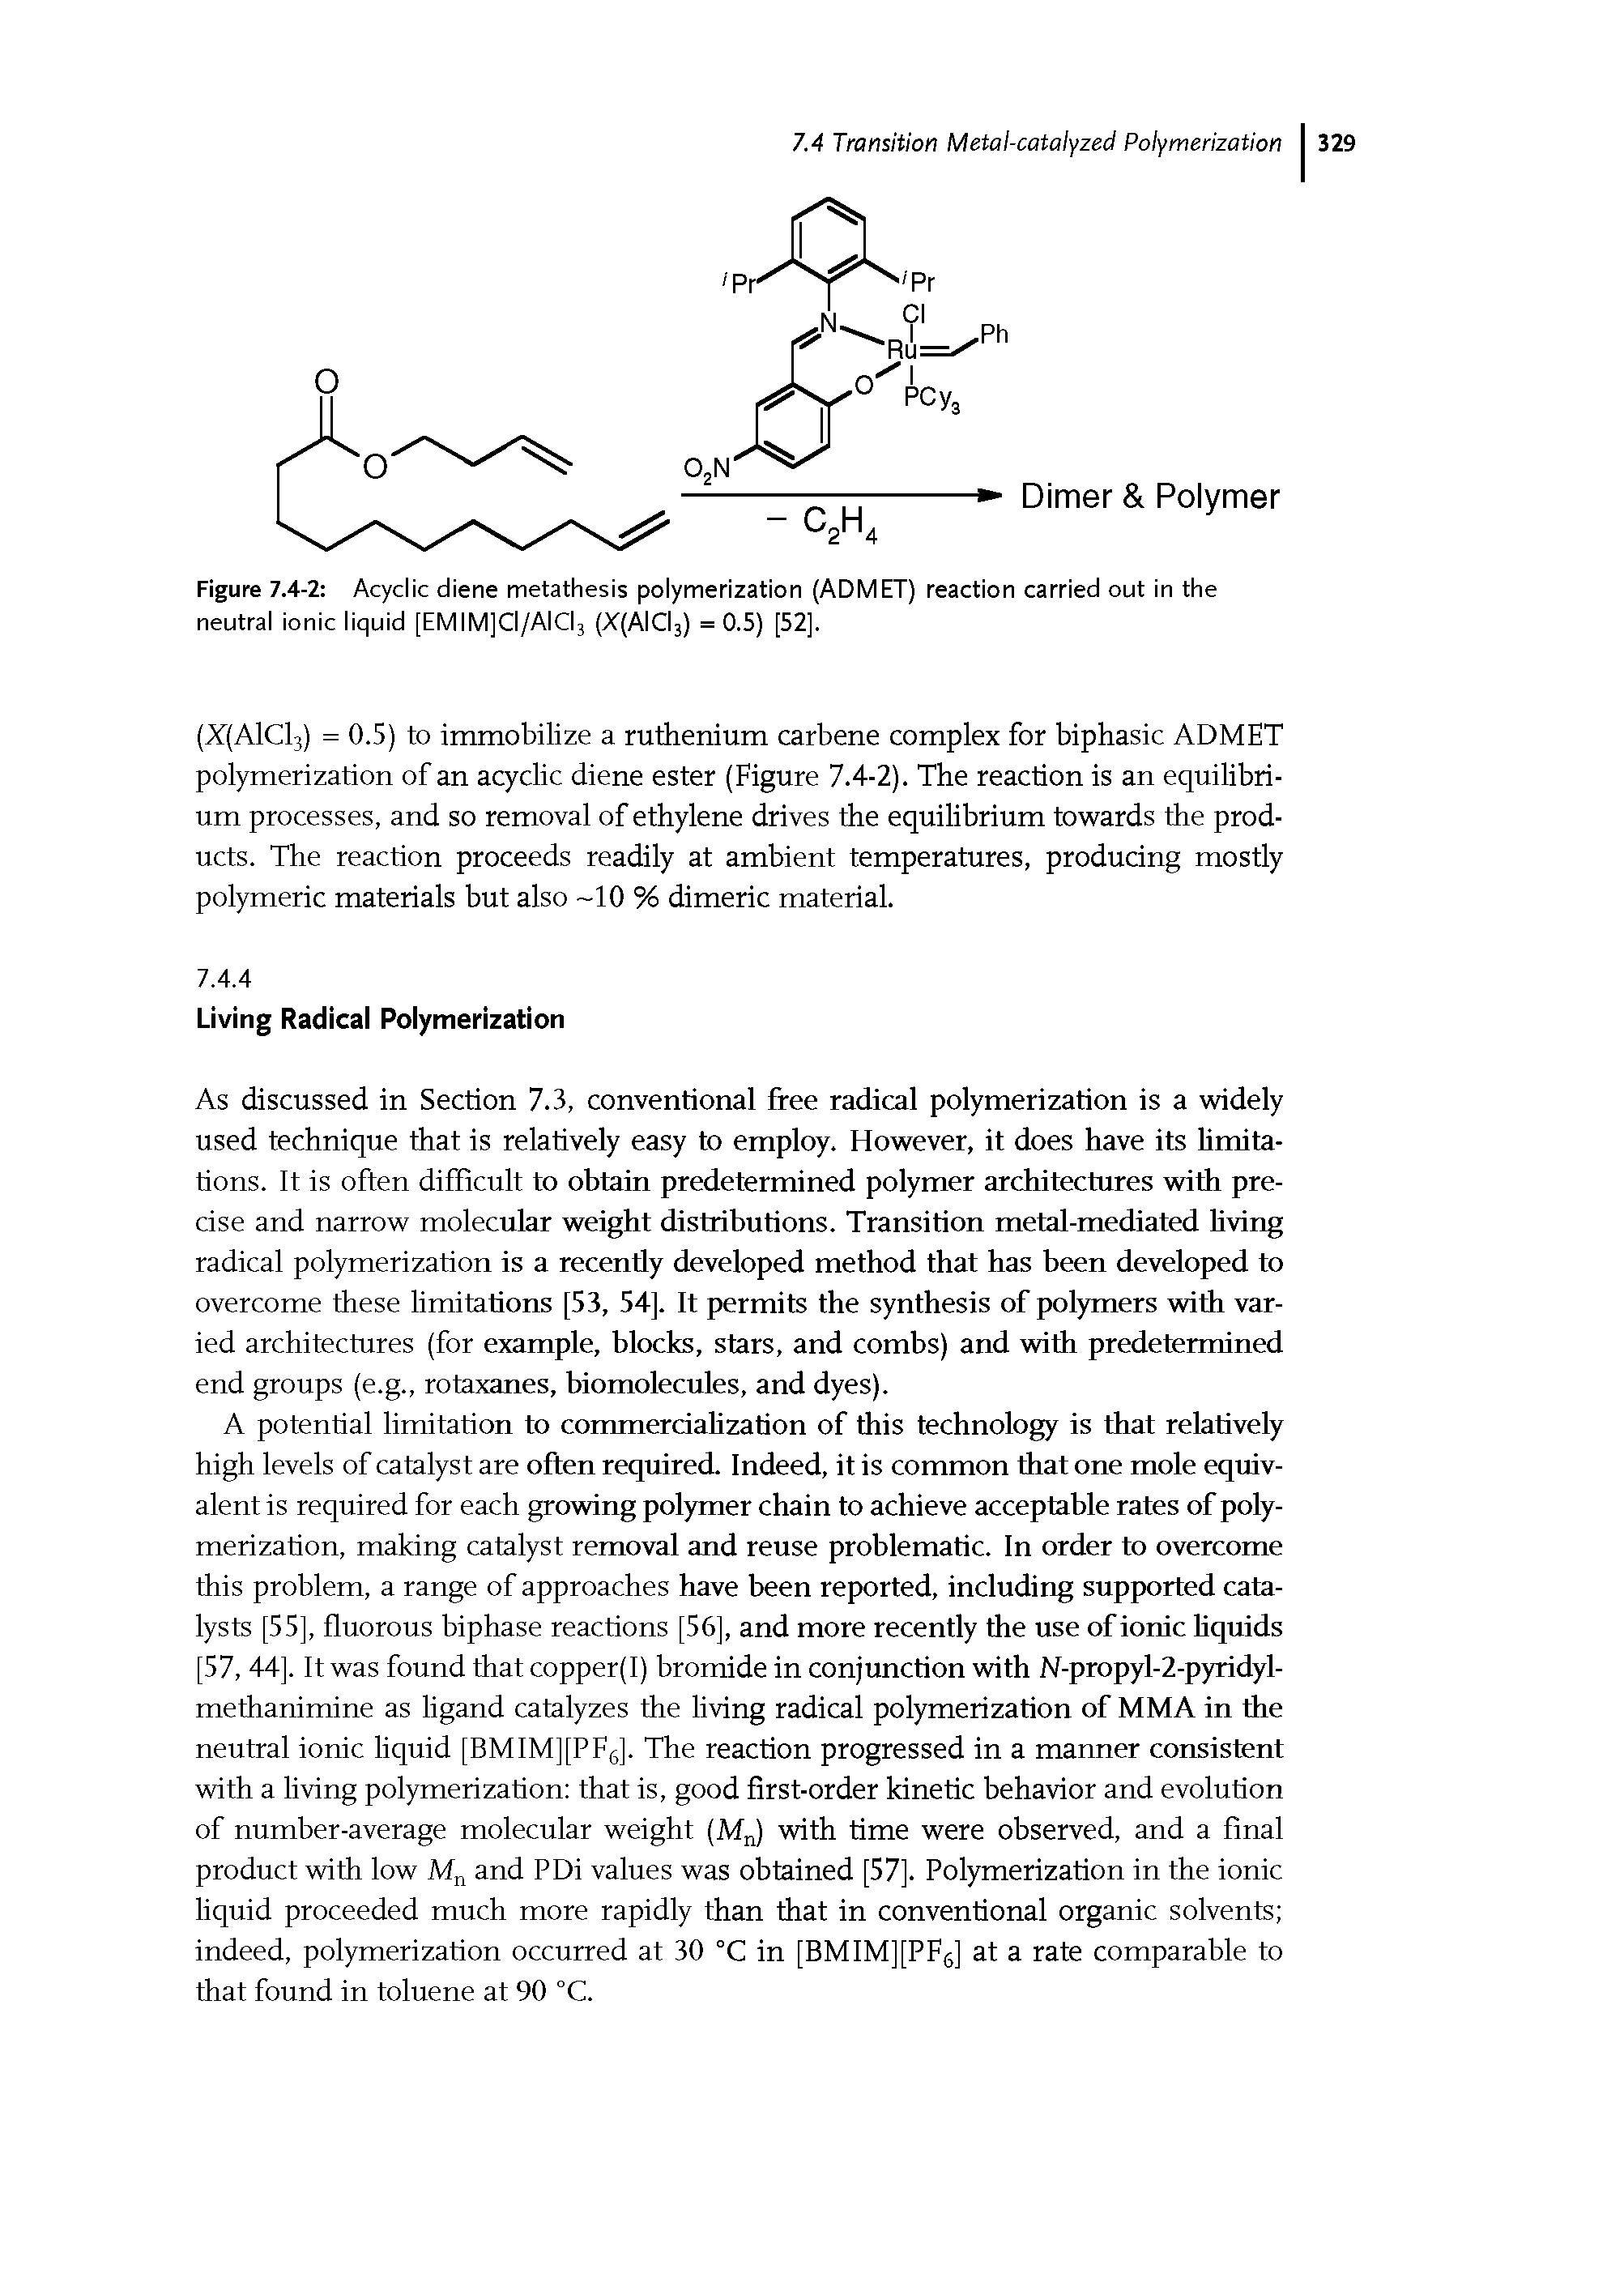 Figure 7.4-2 Acyclic diene metathesis polymerization (ADMET) reaction carried out in the neutral ionic liquid [EMIM]CI/AICl3 (X(AICI3) = 0.5) [52],...